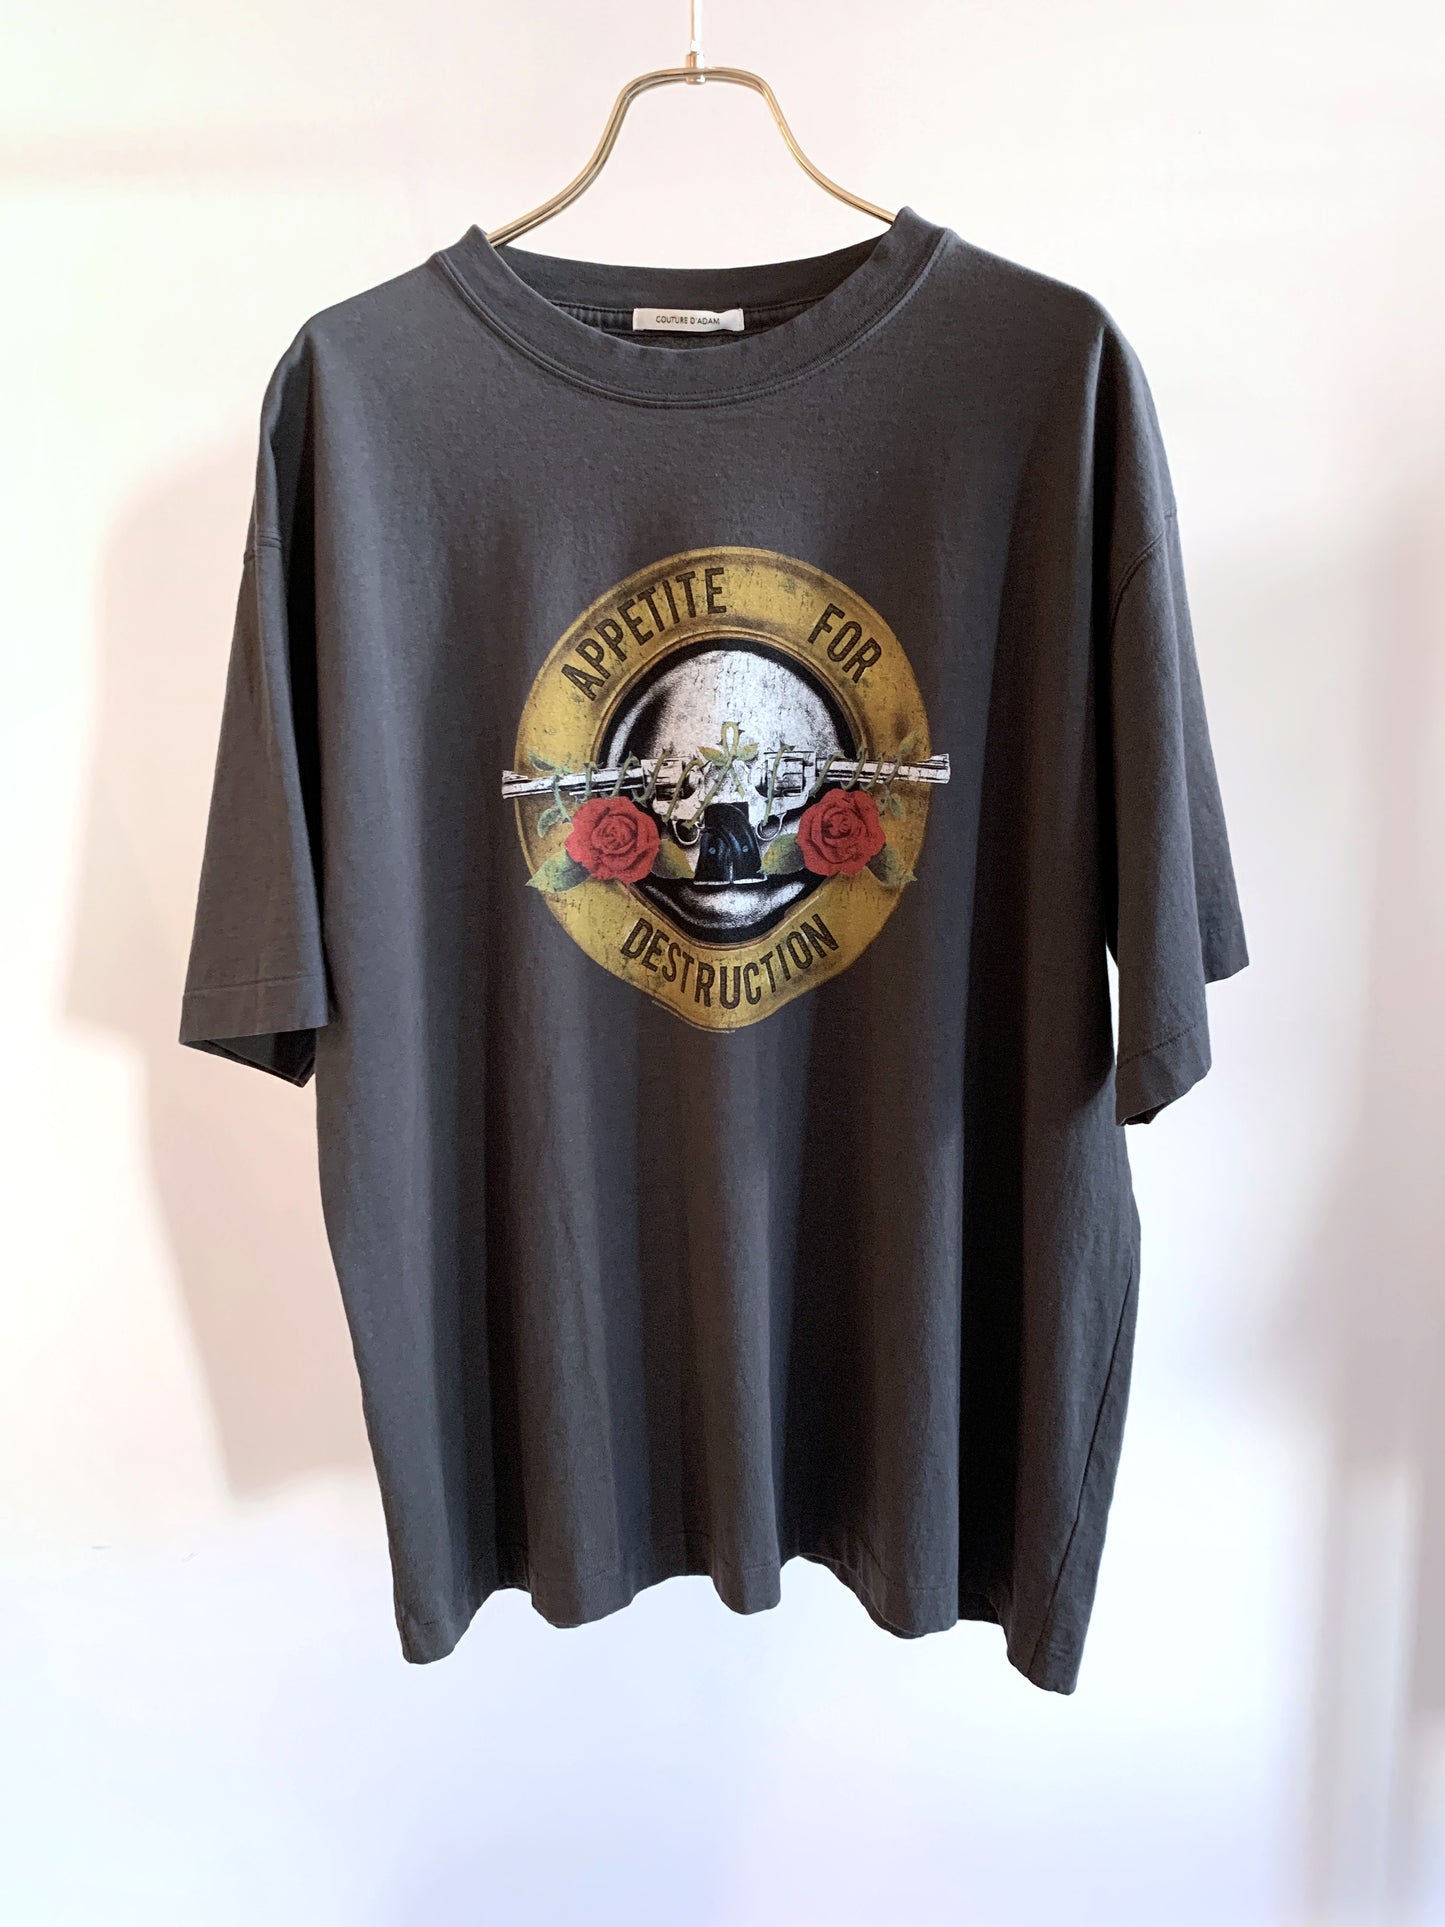 Ｇuns N’ roses graphic T-shirts